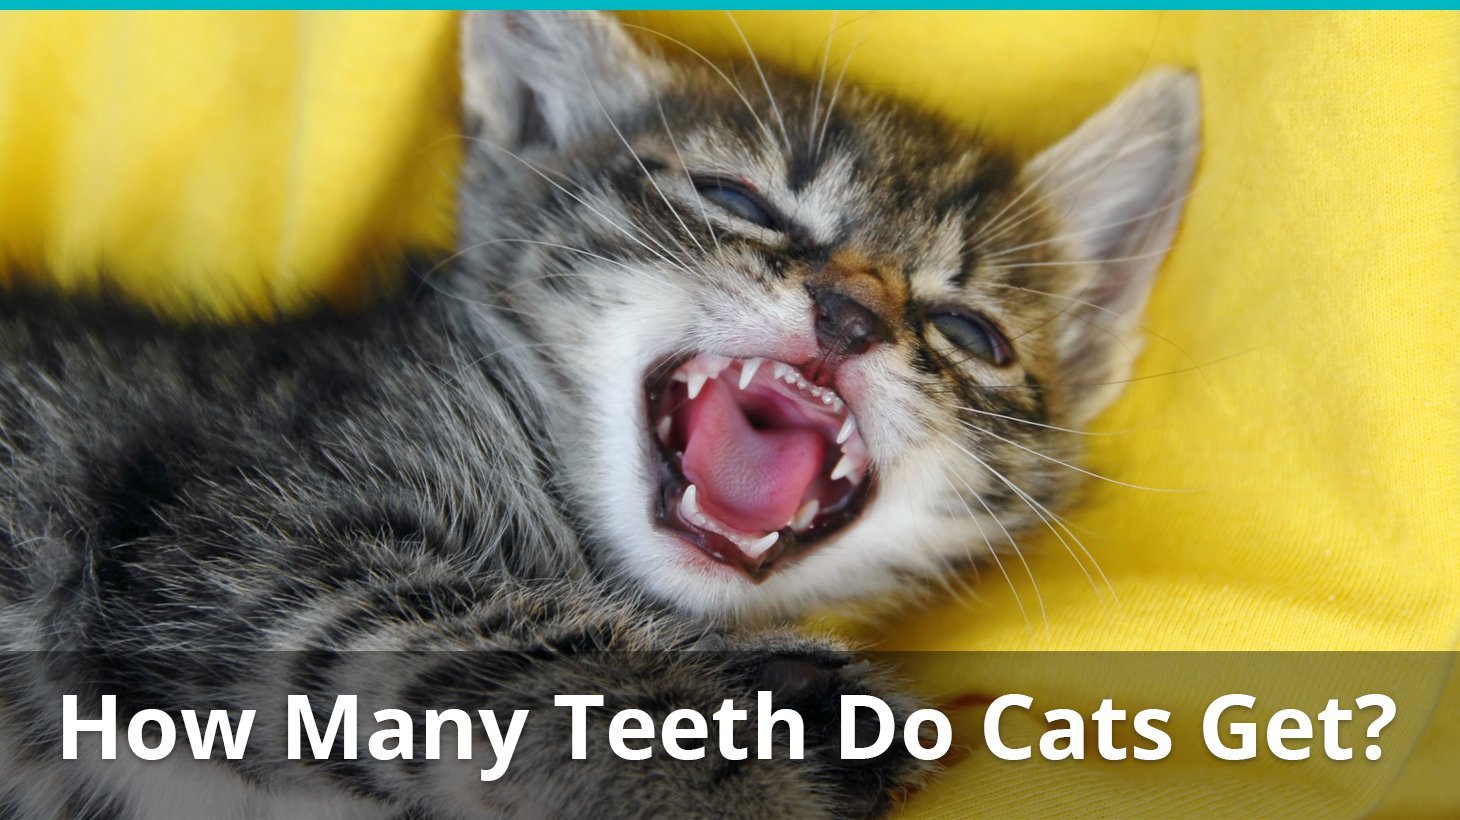 How Many Teeth Does An Adult House Cat Have?